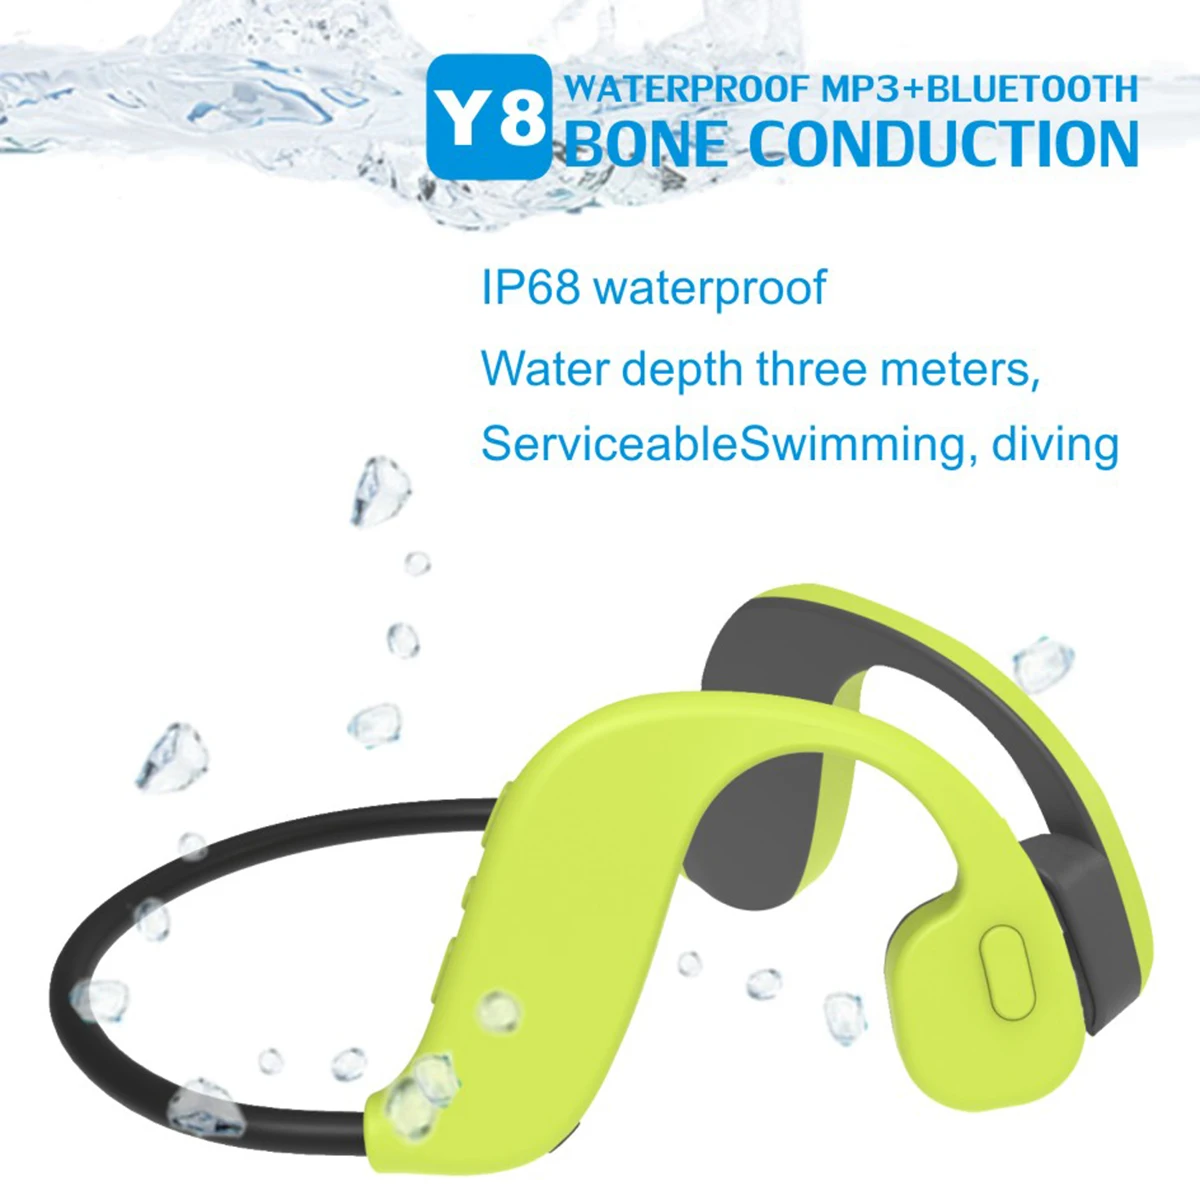 

Non-Ear Bone Conduction Wireless Bluetooth Headset MP3 Built-in 32G Memory Professional IPX8 Waterproof Swimming Running Headset